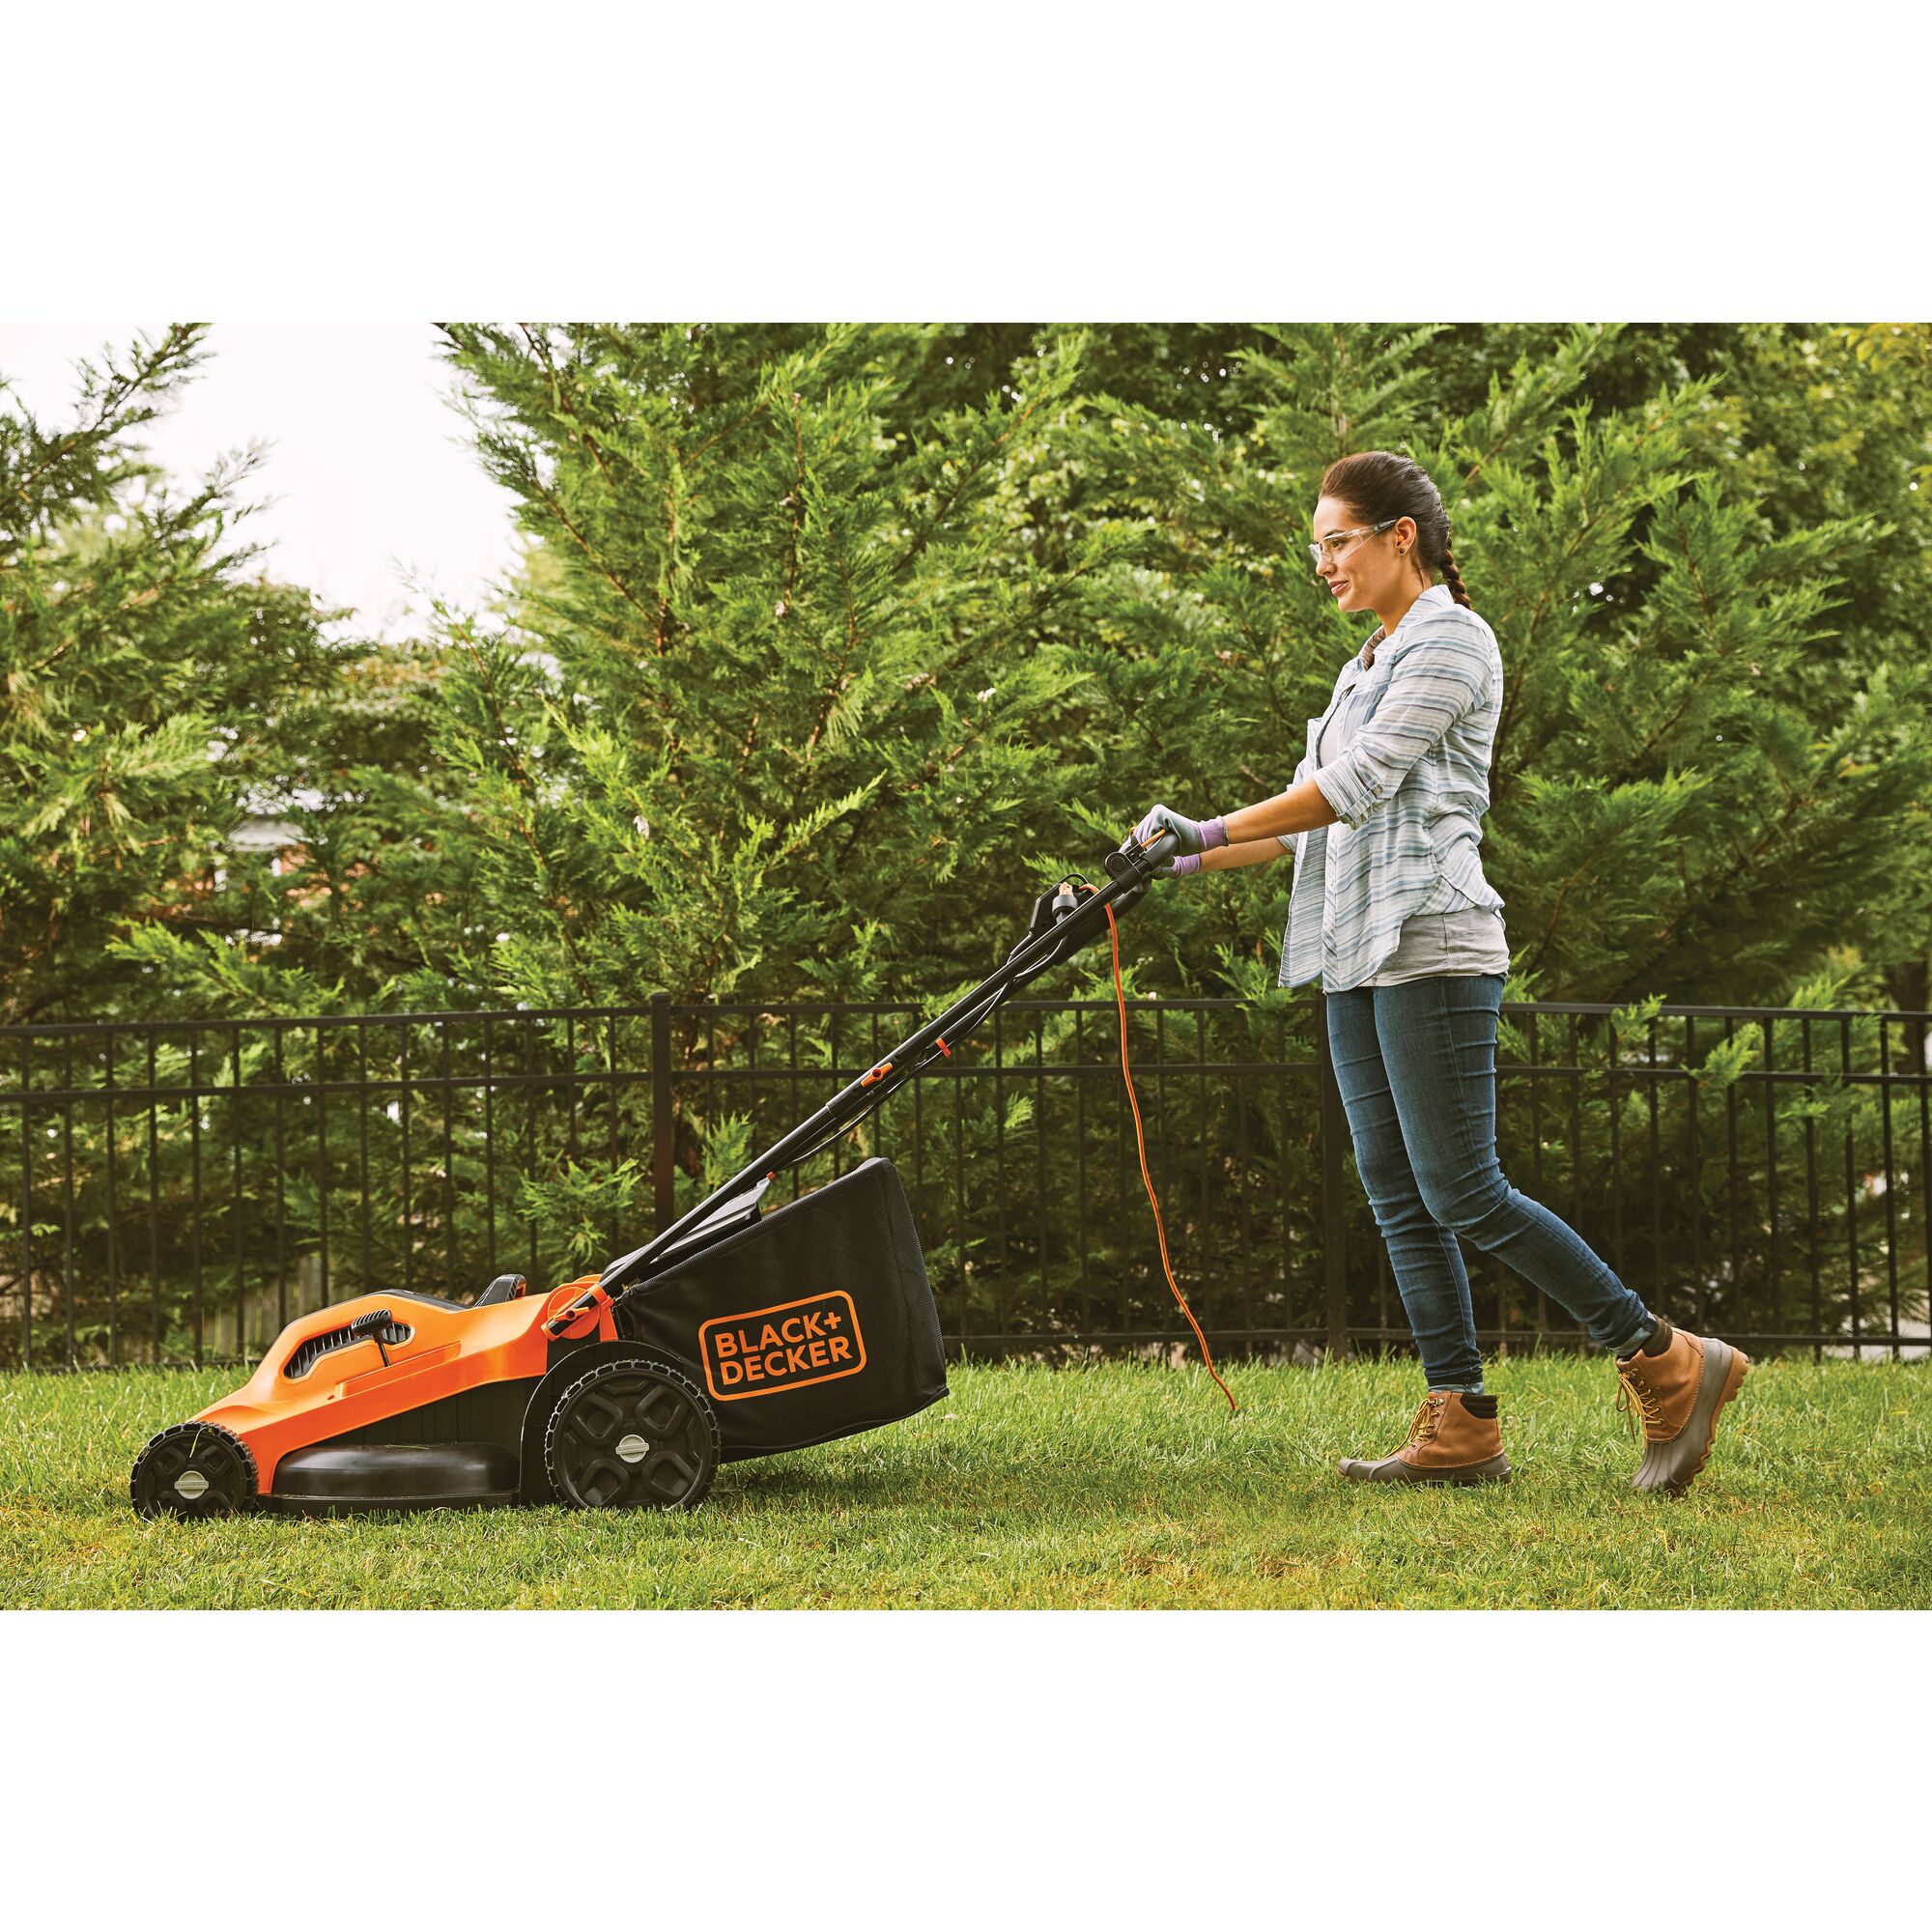 Person pushing the Black and decker 13 amp 20 degree corded electric lawn mower to cut grass in a yard